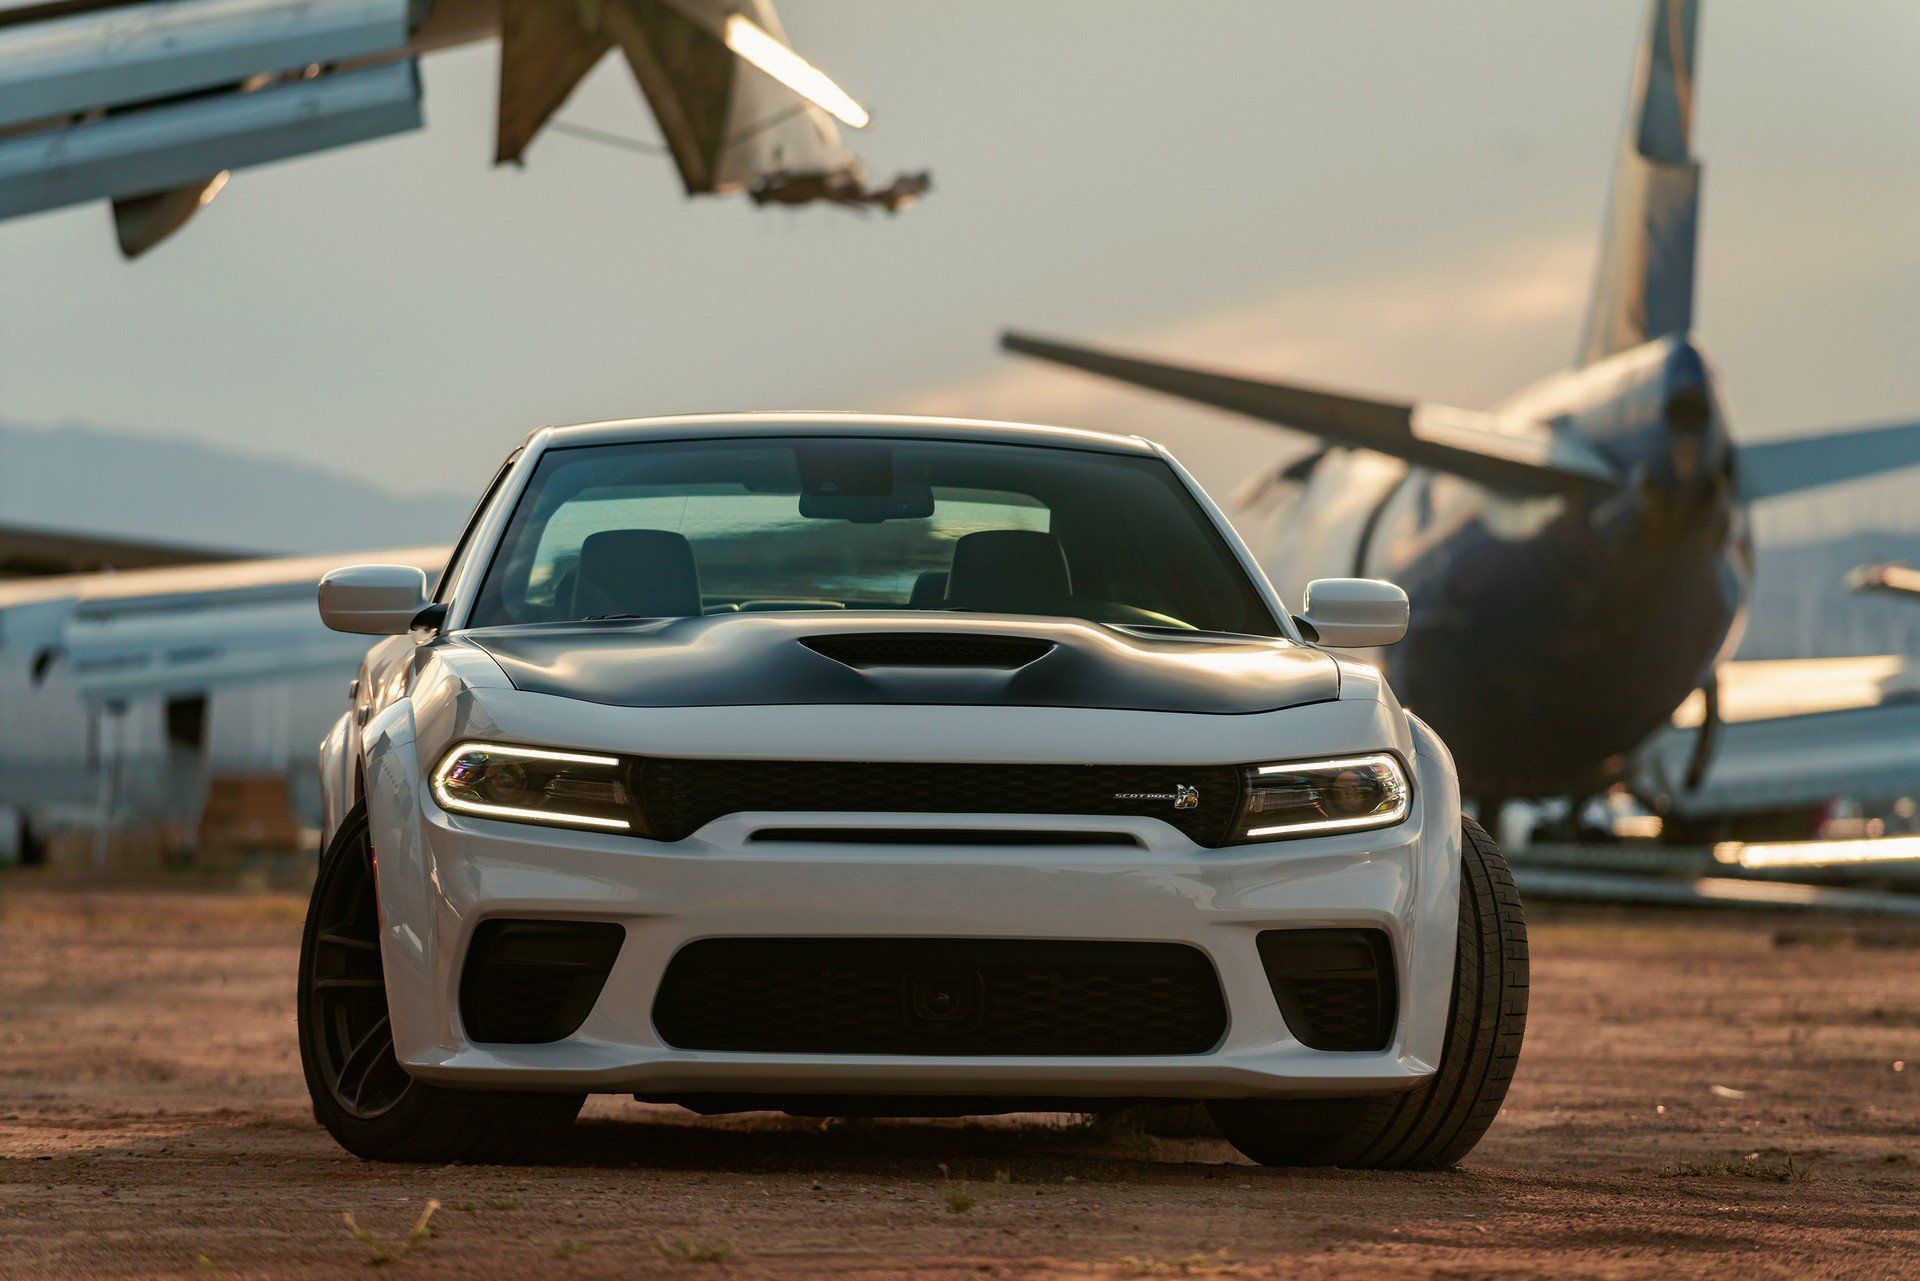 Dodge Charger Scat Pack And SRT Hellcat Widebody Debut With Up To 707 HP. Carscoops. Dodge charger srt, Charger srt hellcat, Charger srt